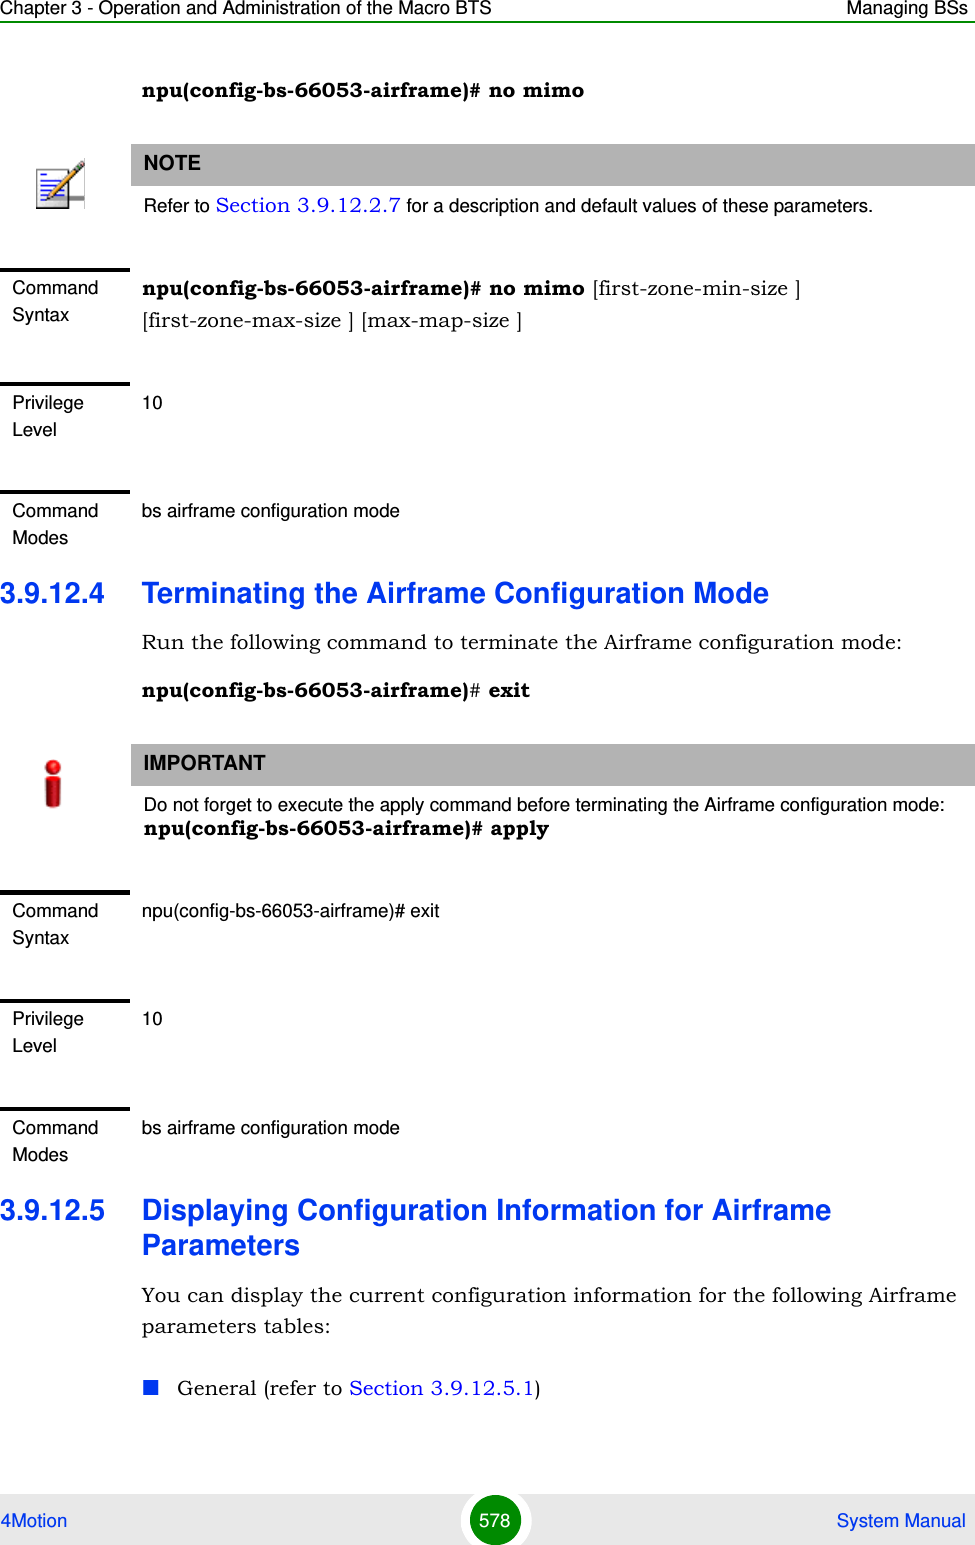 Chapter 3 - Operation and Administration of the Macro BTS Managing BSs4Motion 578  System Manualnpu(config-bs-66053-airframe)# no mimo3.9.12.4 Terminating the Airframe Configuration ModeRun the following command to terminate the Airframe configuration mode:npu(config-bs-66053-airframe)# exit3.9.12.5 Displaying Configuration Information for Airframe ParametersYou can display the current configuration information for the following Airframe parameters tables:General (refer to Section 3.9.12.5.1)NOTERefer to Section 3.9.12.2.7 for a description and default values of these parameters.Command Syntaxnpu(config-bs-66053-airframe)# no mimo [first-zone-min-size ] [first-zone-max-size ] [max-map-size ]Privilege Level10Command Modesbs airframe configuration modeIMPORTANTDo not forget to execute the apply command before terminating the Airframe configuration mode: npu(config-bs-66053-airframe)# applyCommand Syntaxnpu(config-bs-66053-airframe)# exitPrivilege Level10Command Modesbs airframe configuration mode